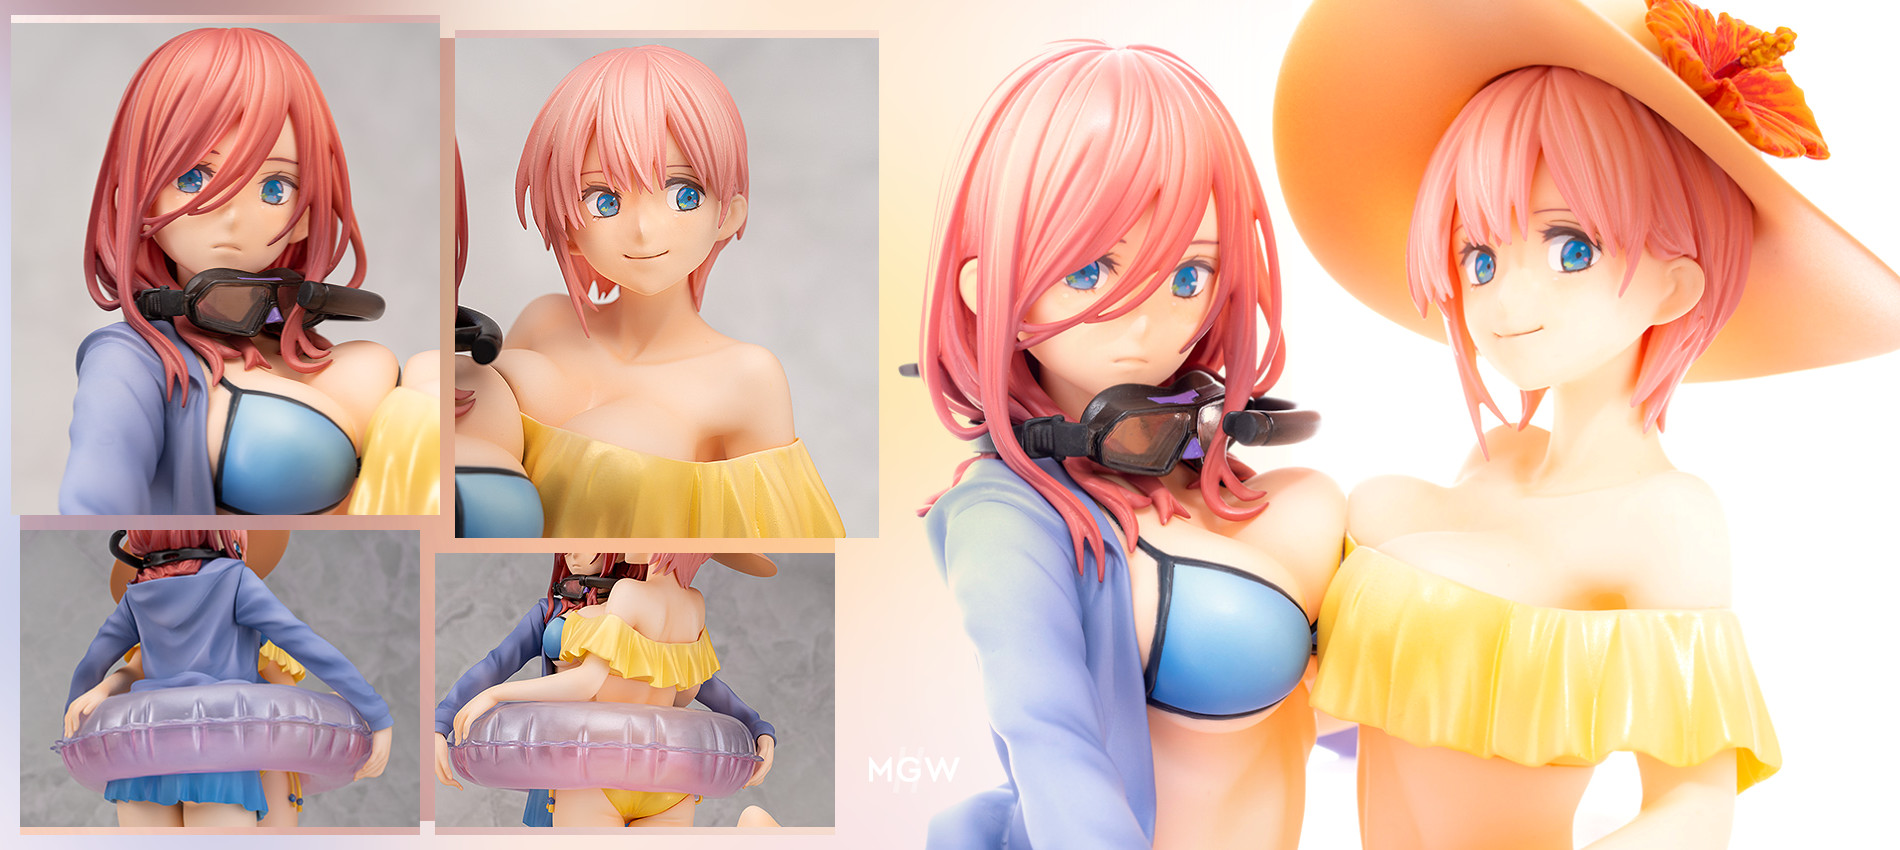 Ichika Nakano Miku Nakano by WING from The Quintessential Quintuplets